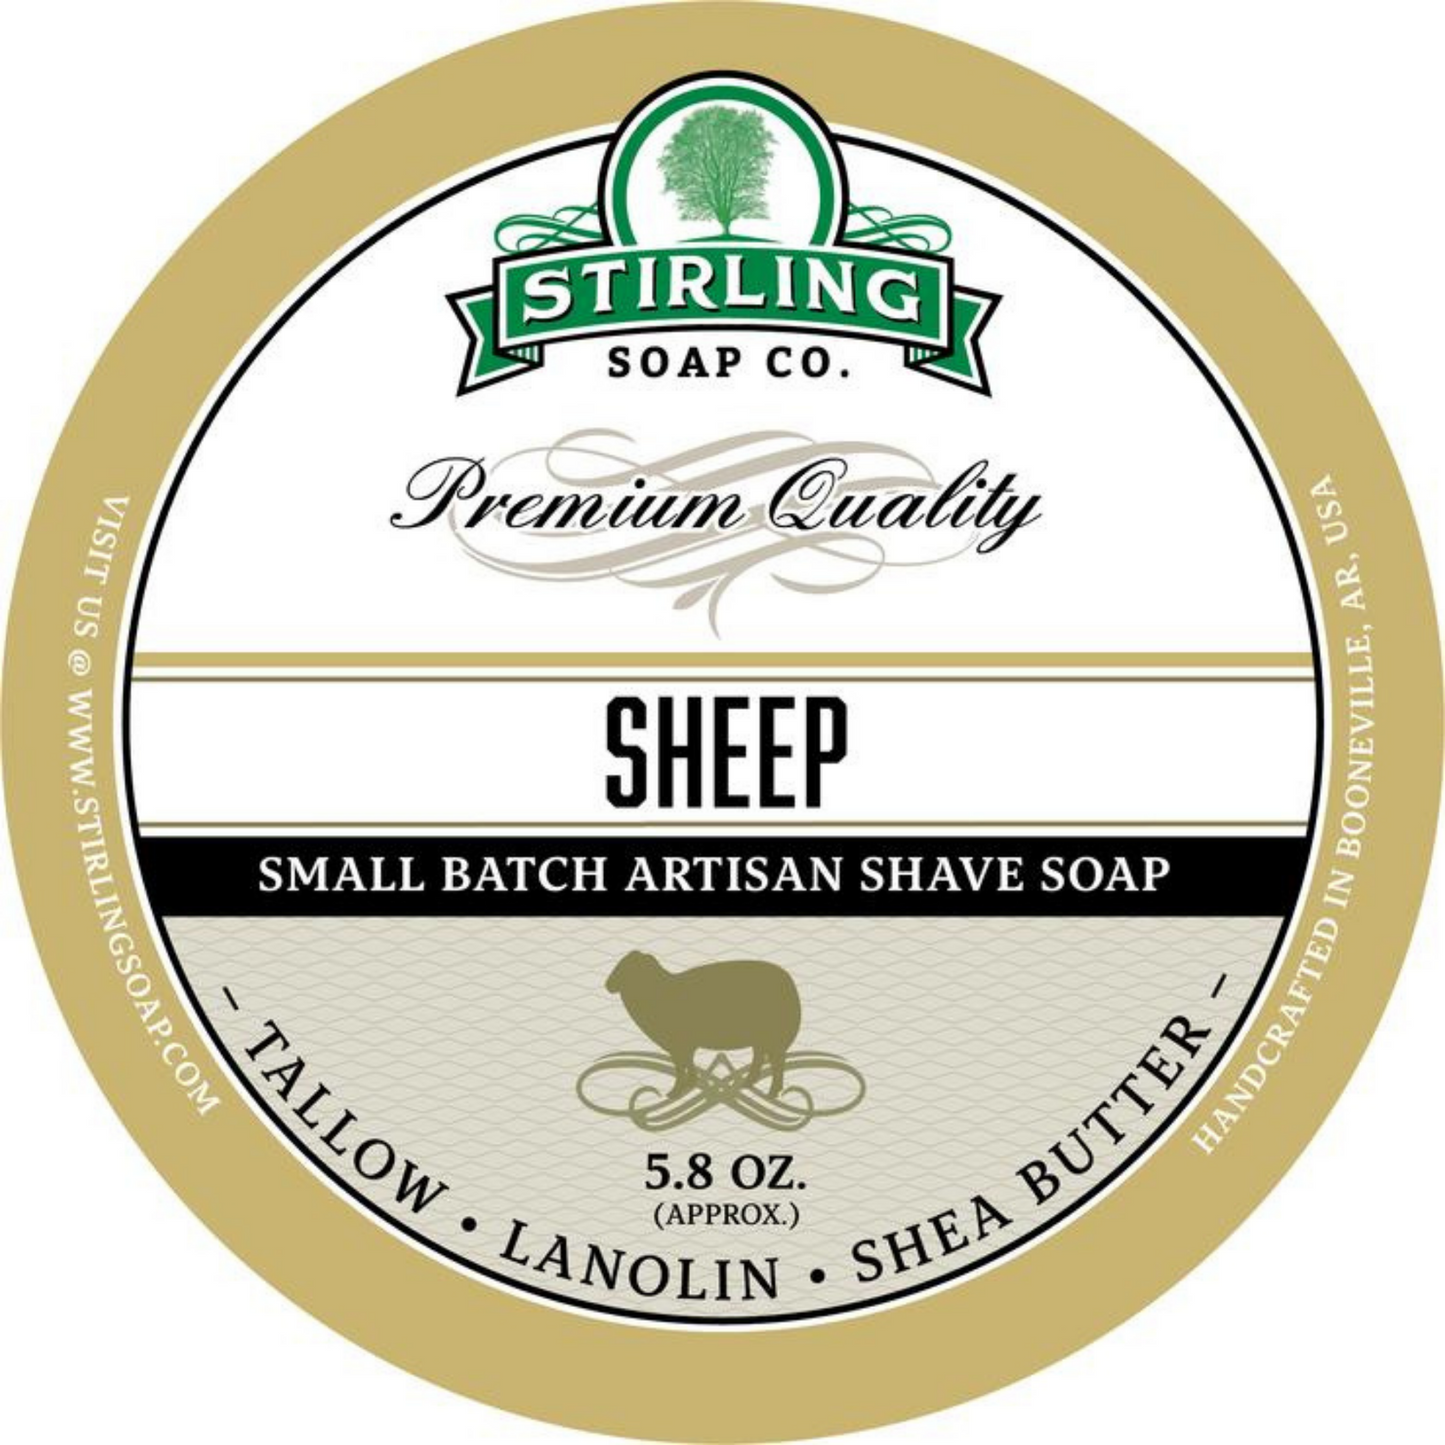 Primary Image of Sheep Tallow Shave Soap